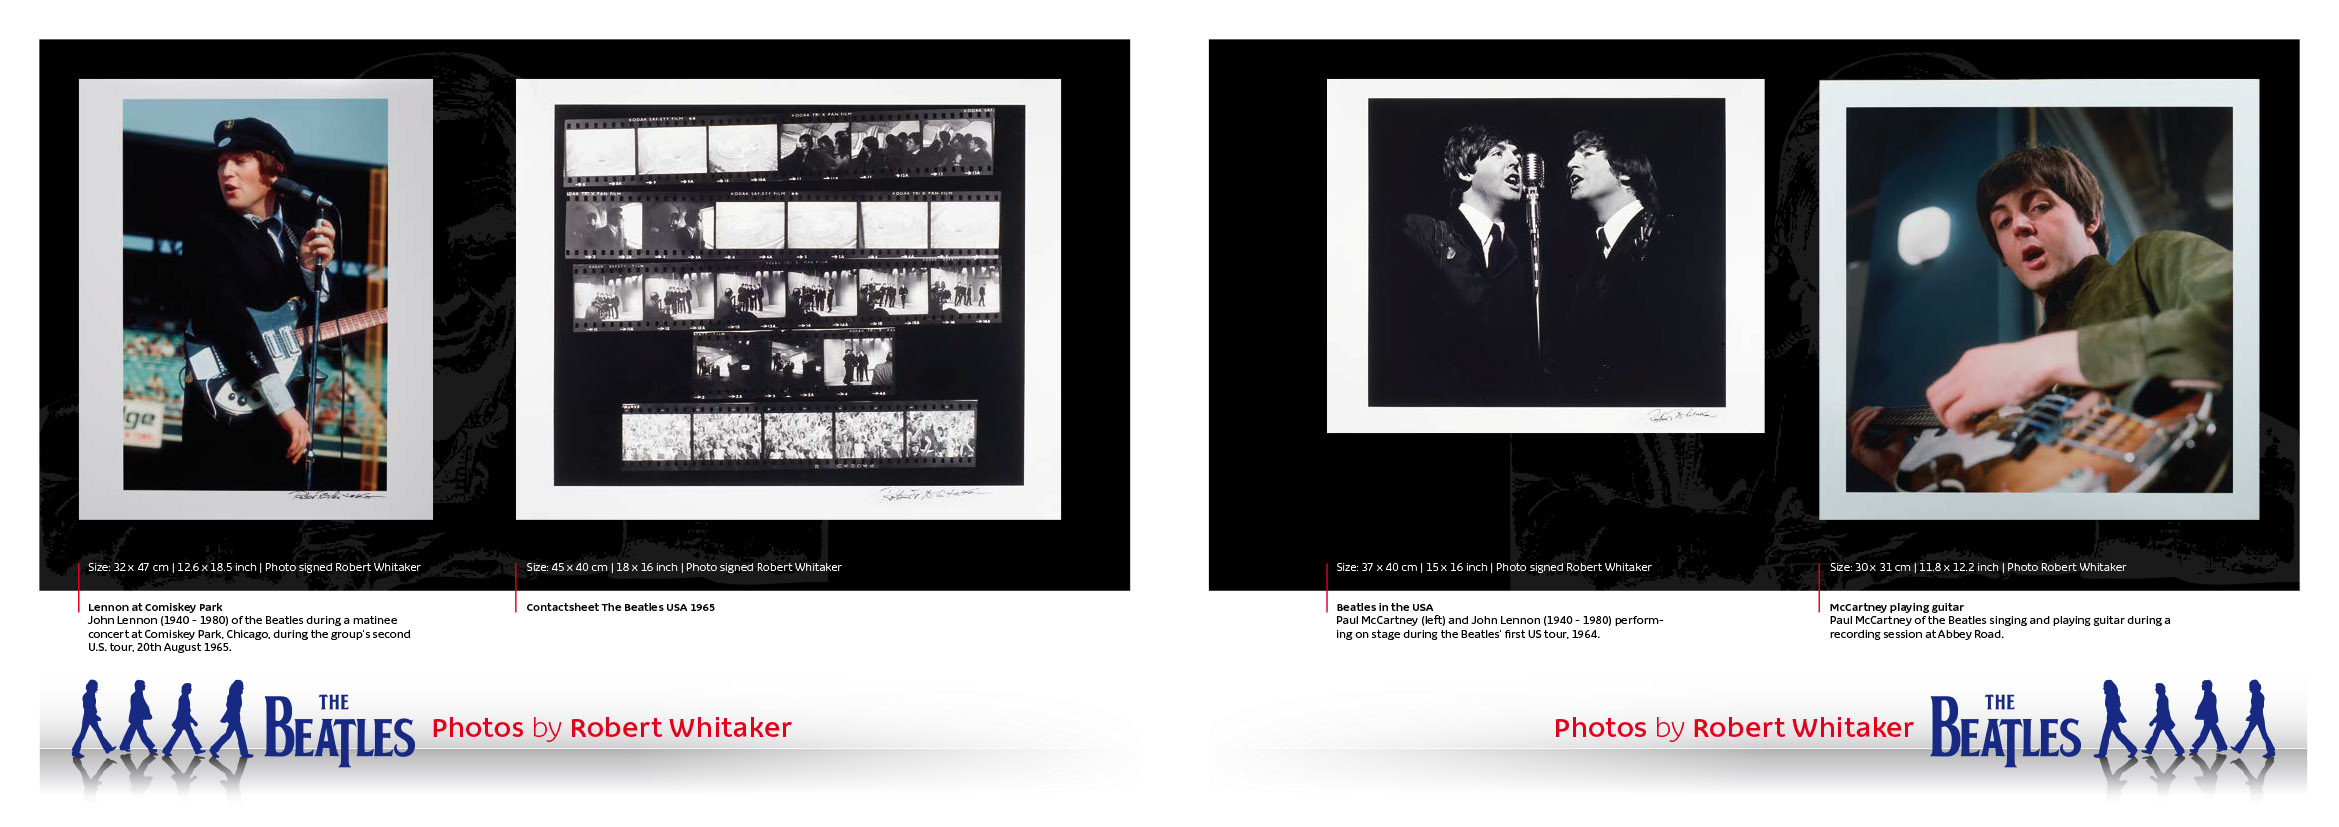 Beatles Photo Collection by Robert Whitaker